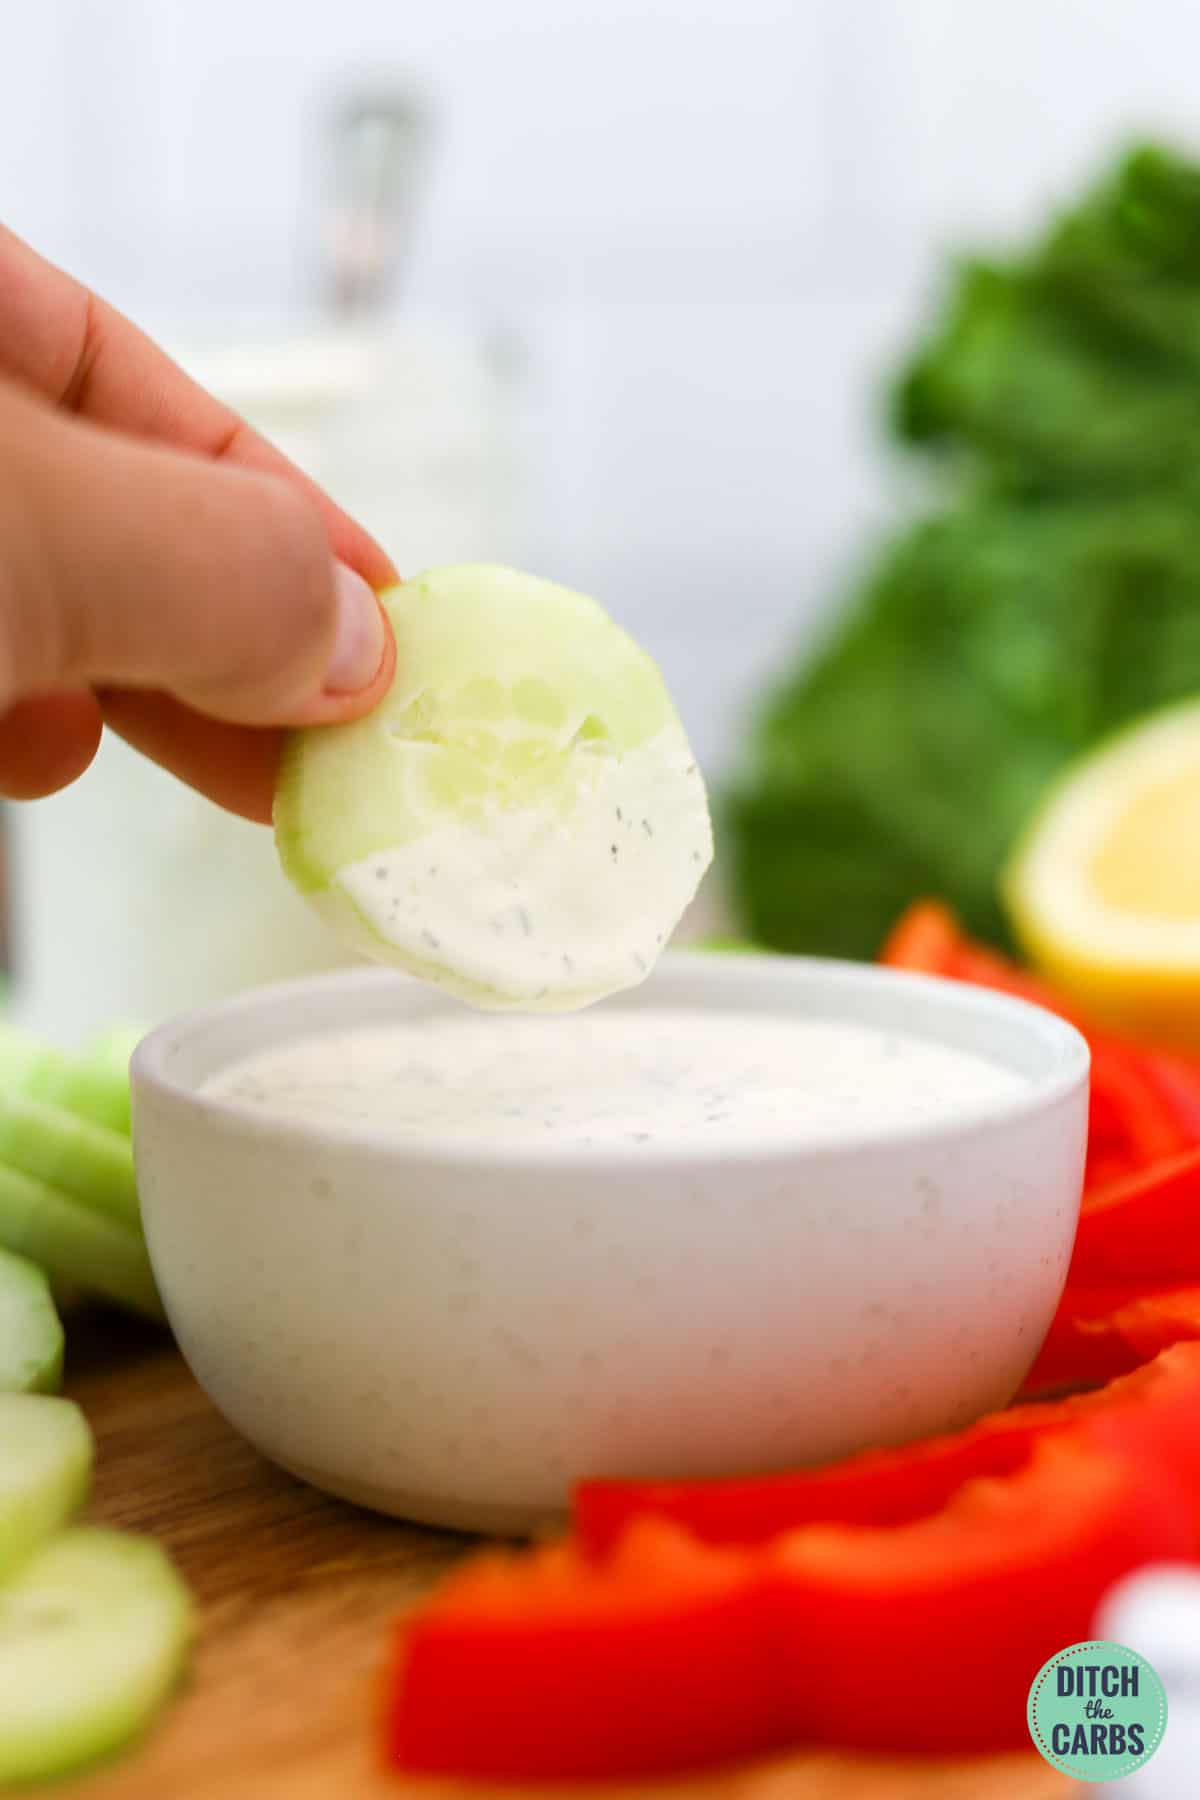 A hand dipping a slice of cucumber into the keto ranch dip.